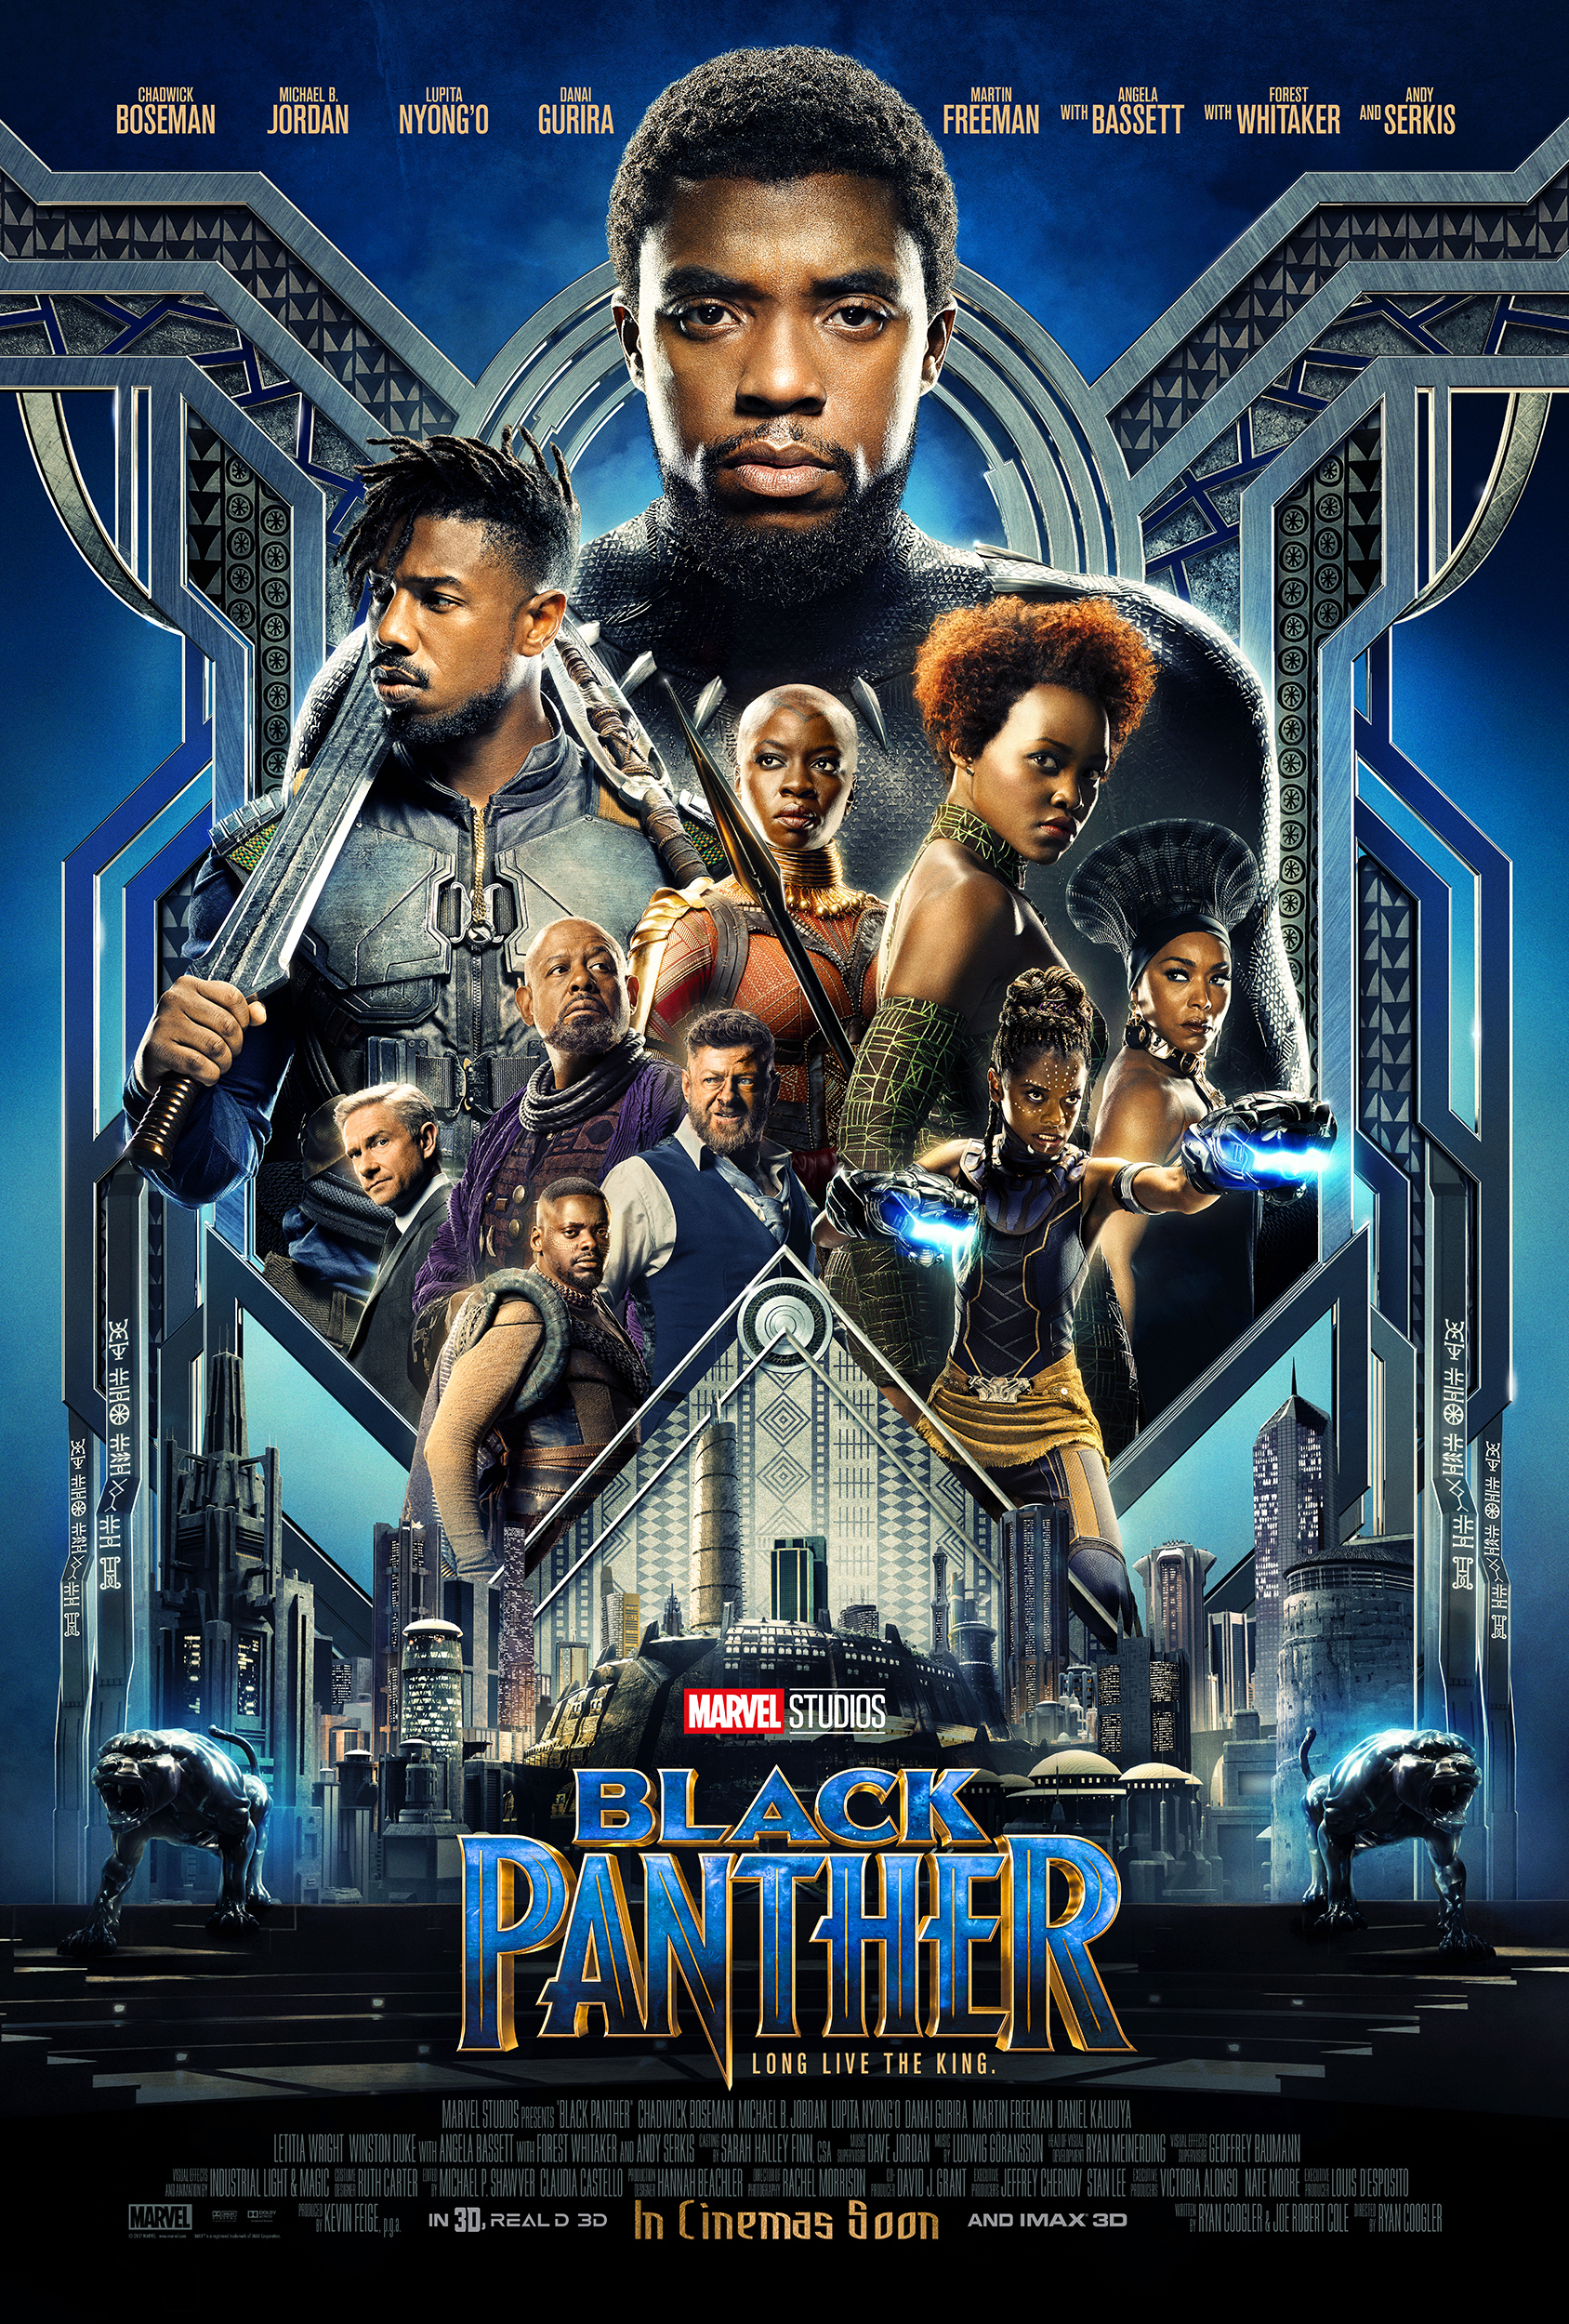 Black Panther film review: hail to the king | SciFiNow - The World's